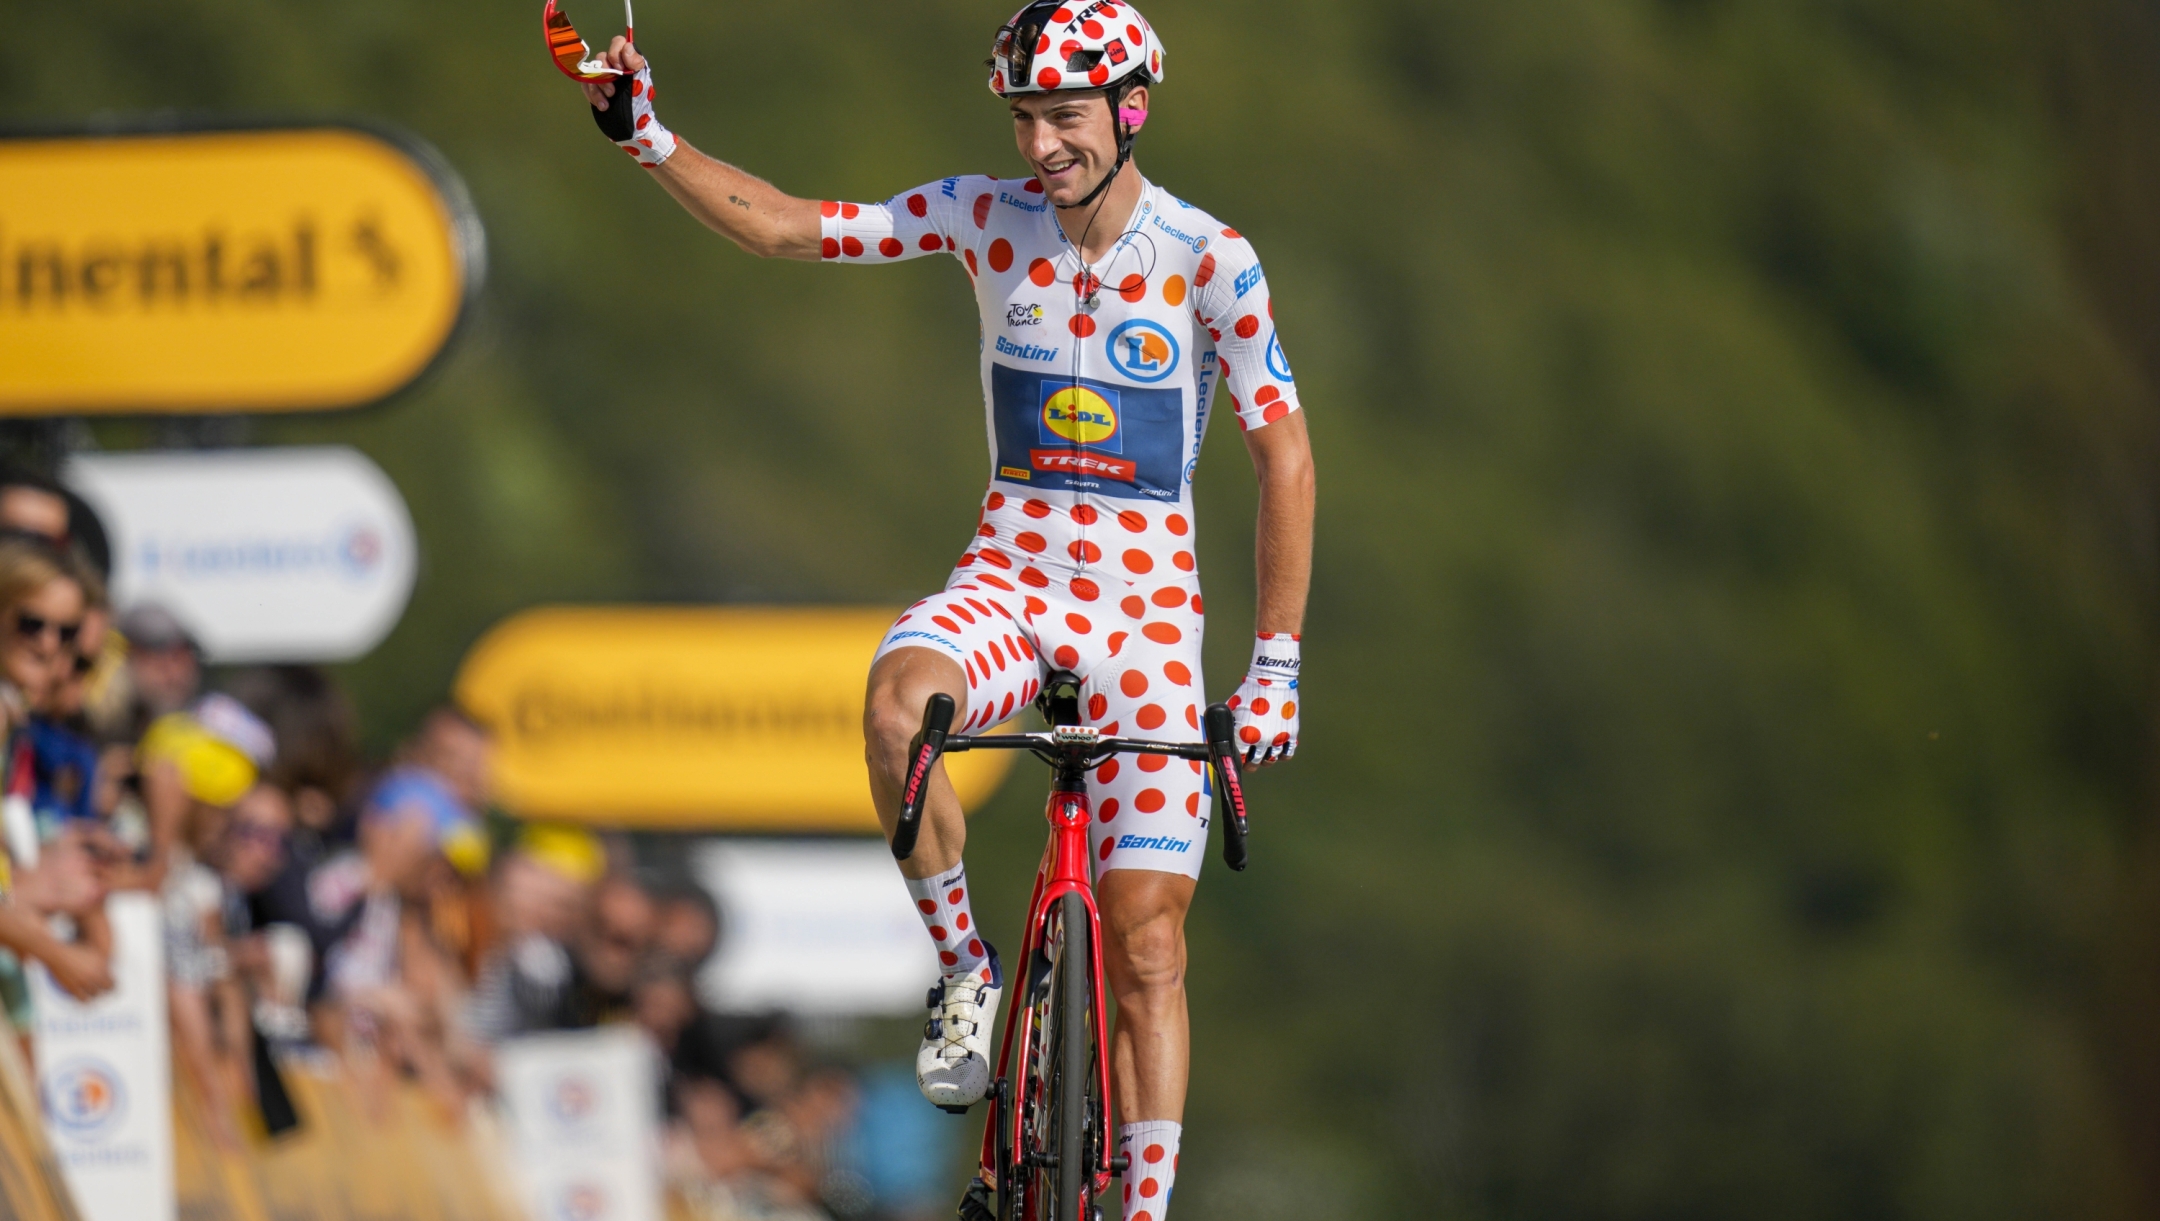 Italy's Giulio Ciccone, wearing the best climber's dotted jersey, celebrates winning the best climbers dotted jersey as he crosses the finish line of the twentieth stage of the Tour de France cycling race over 133.5 kilometers (83 miles) with start in Belfort and finish in Le Markstein Fellering, France, Saturday, July 22, 2023. (AP Photo/Daniel Cole)